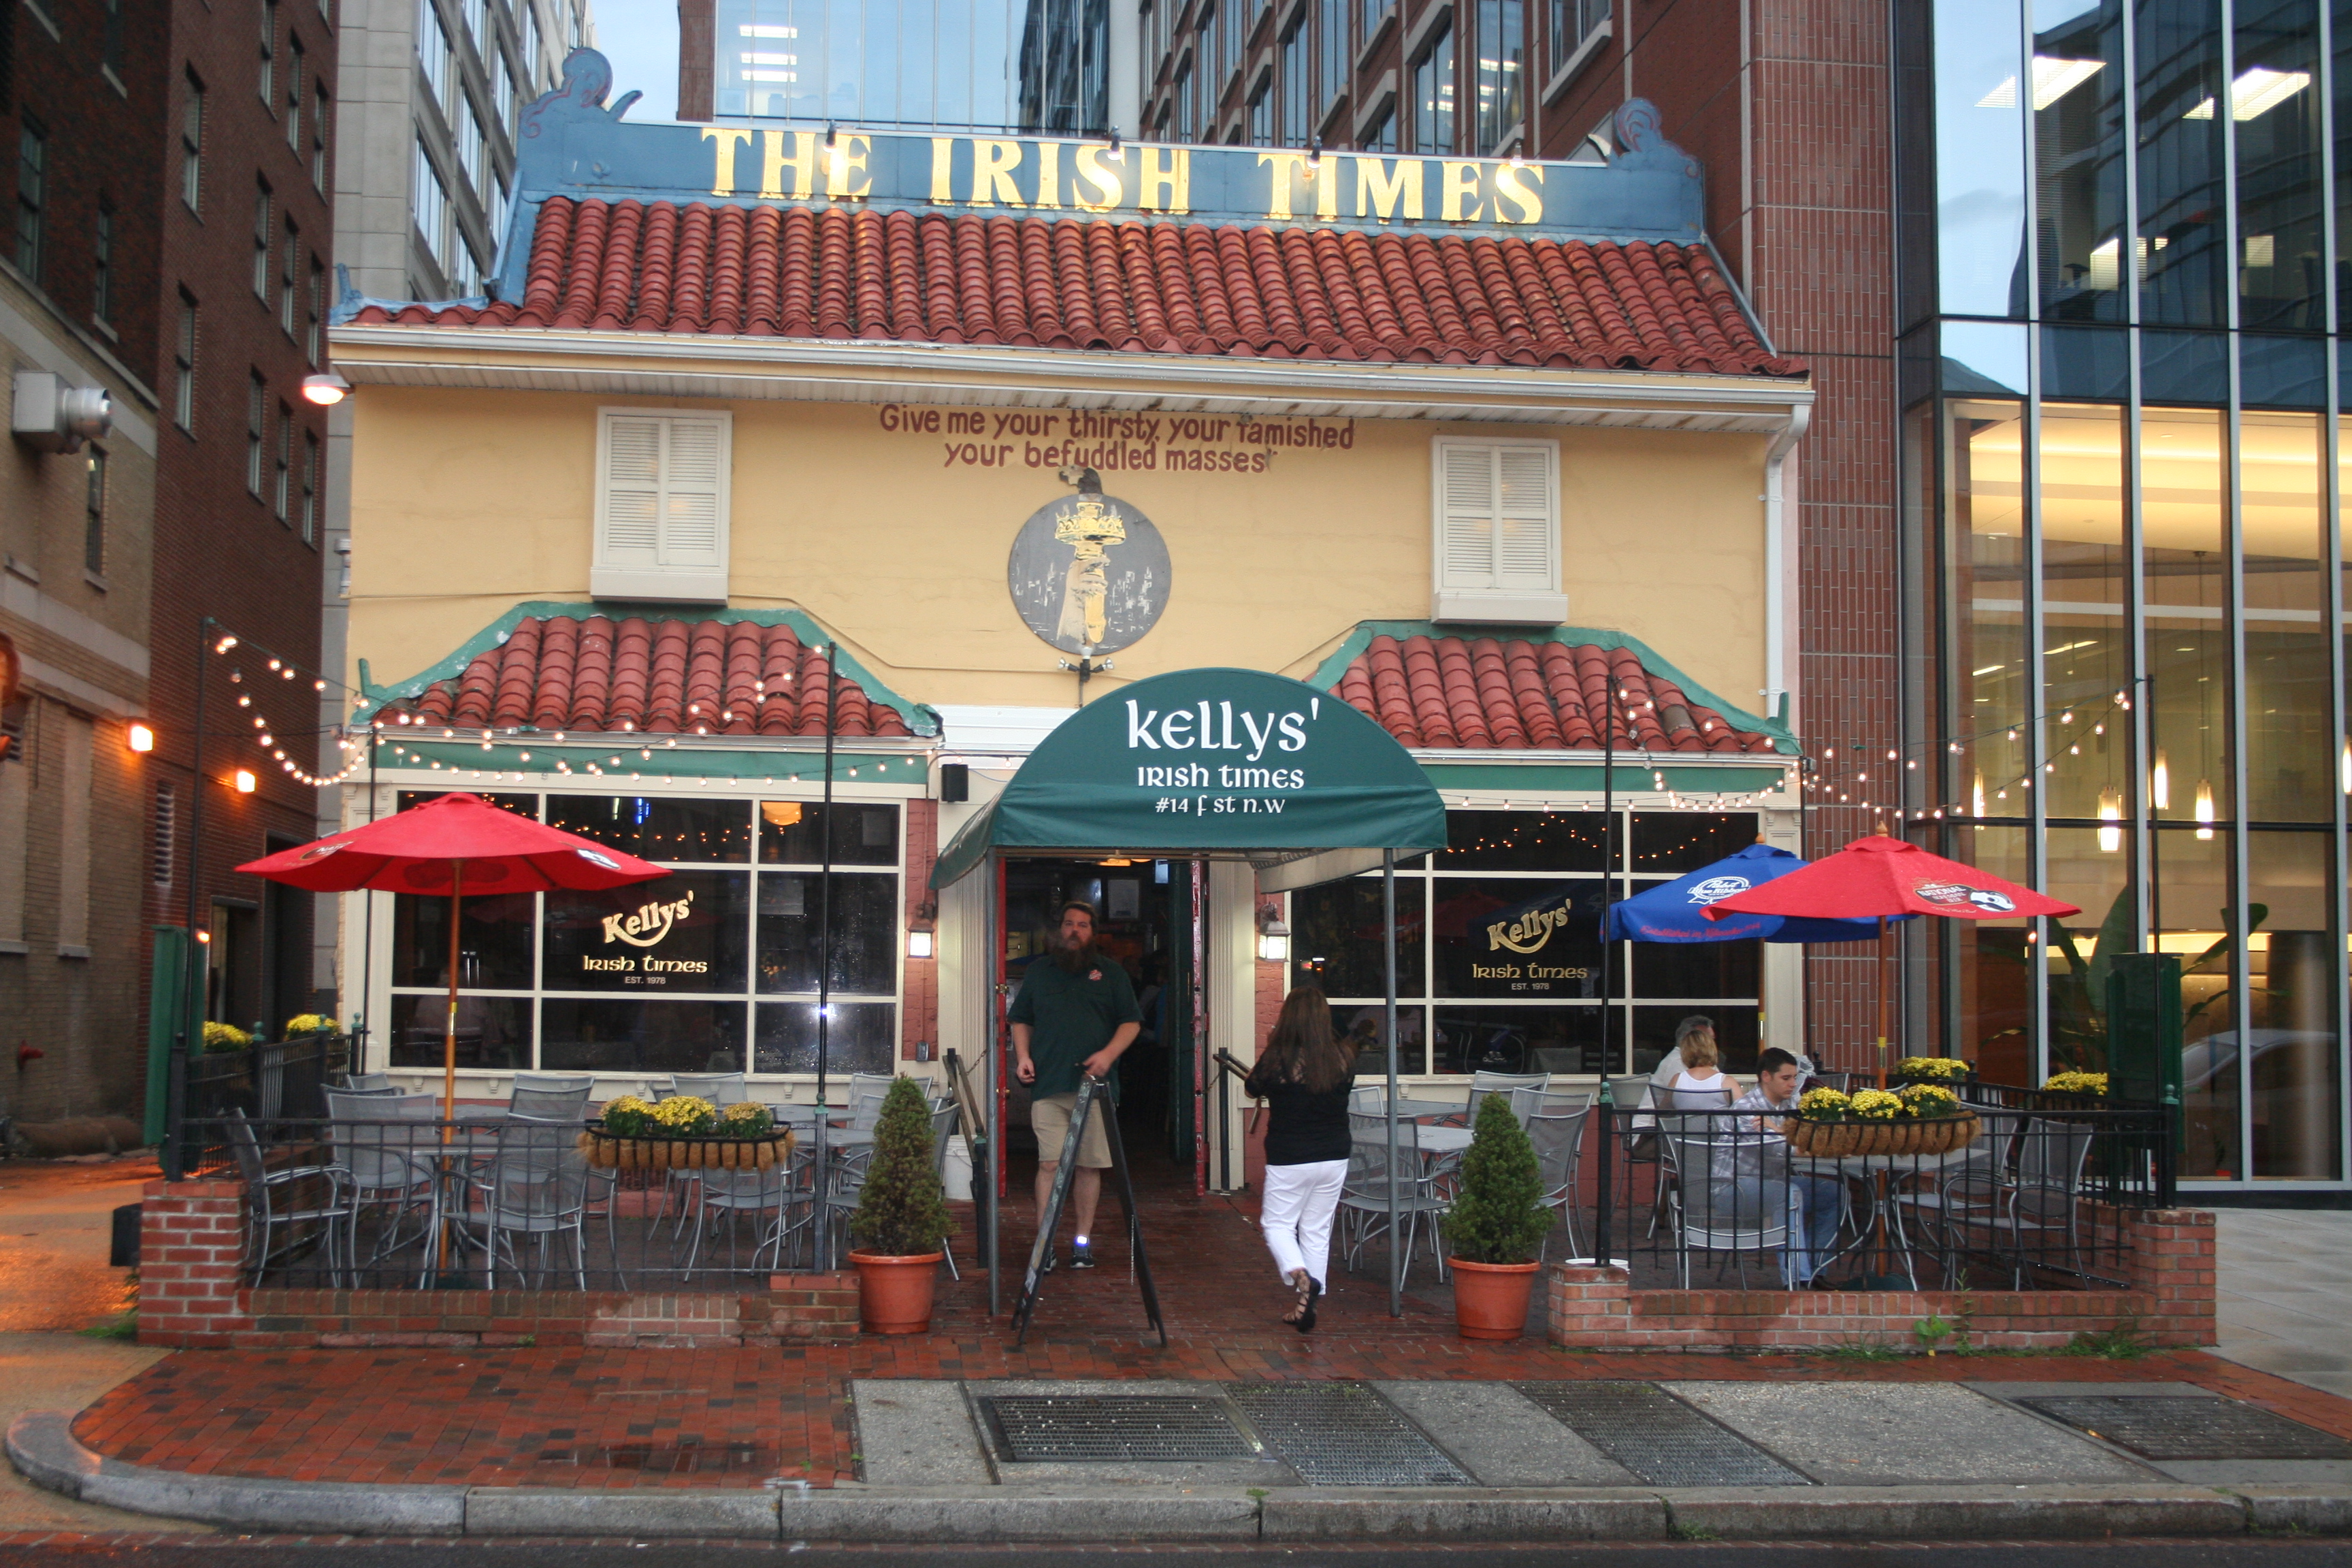 Kelly's Irish Times is surrounded by government and high-rise office buildings. (Photo: Mark Heckathorn/DC on Heels)